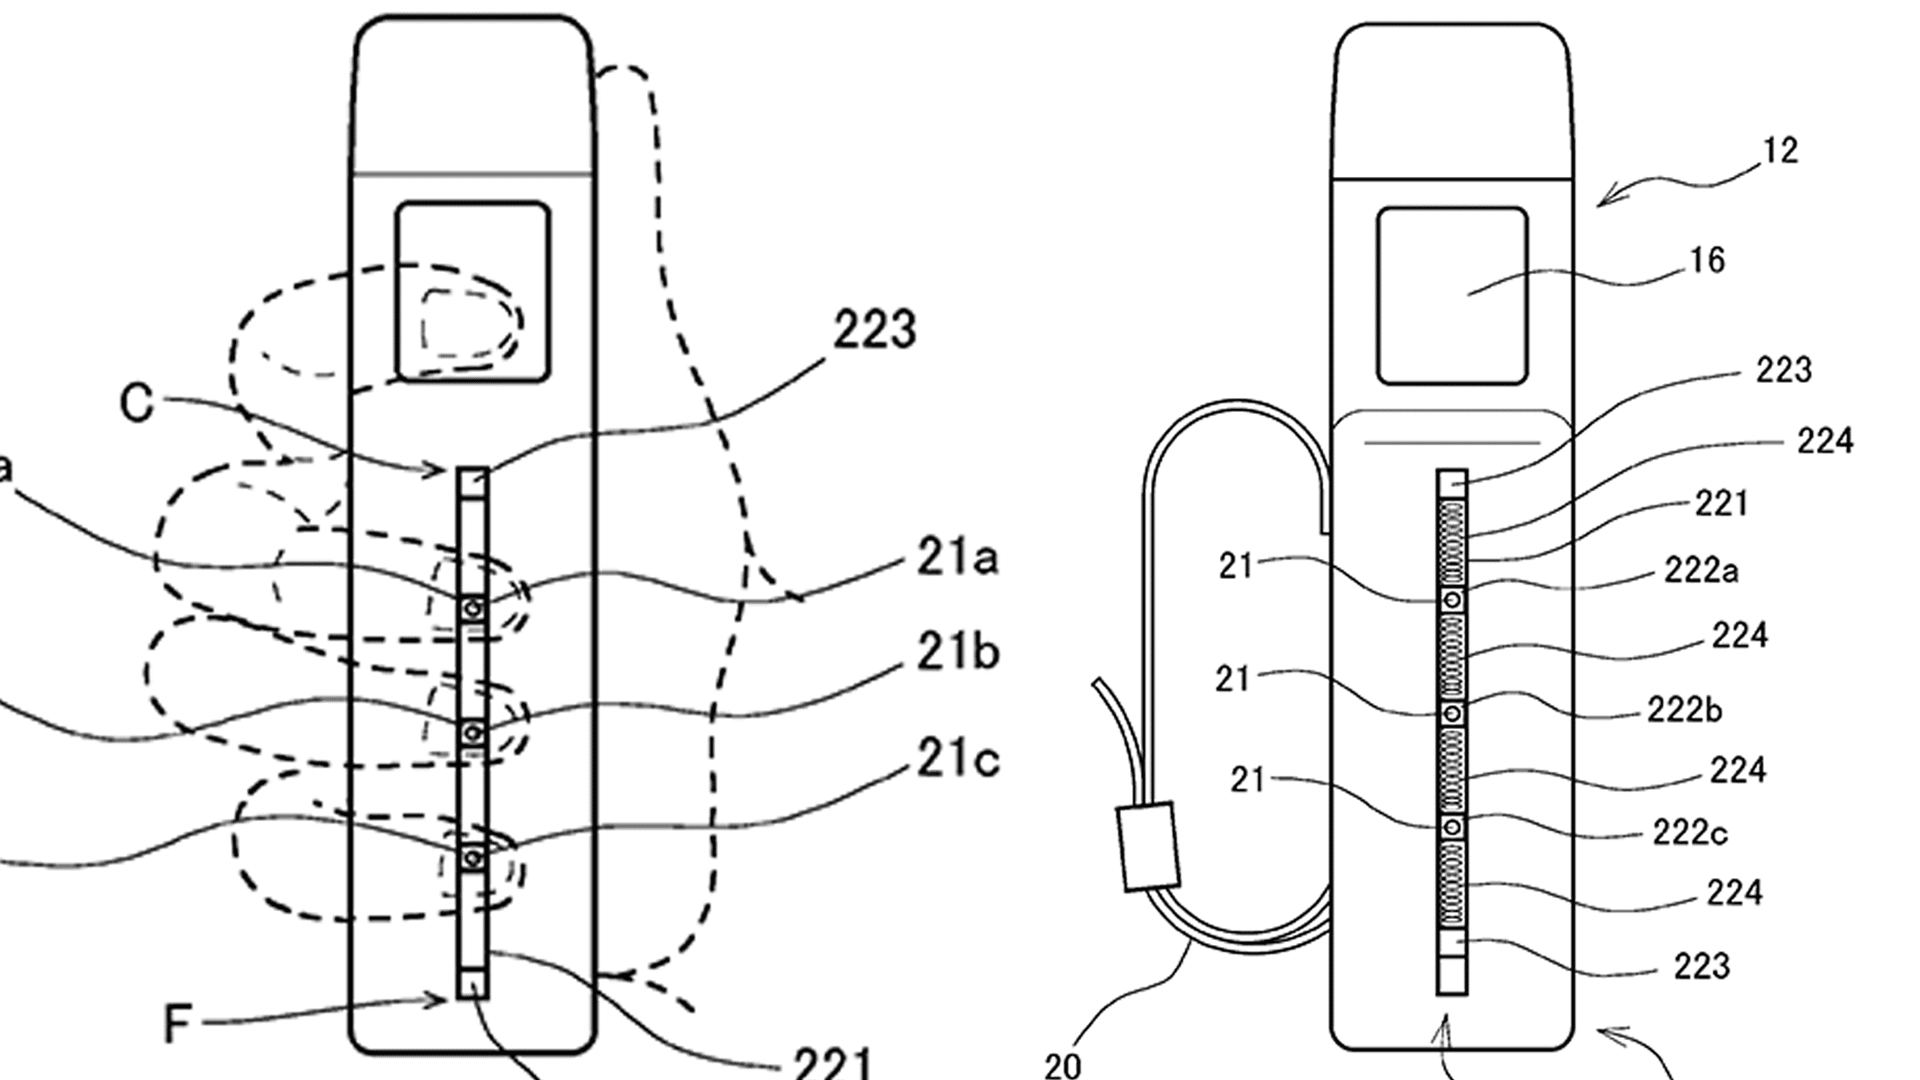 Sony patents a new VR motion controller, similar to Valve Index